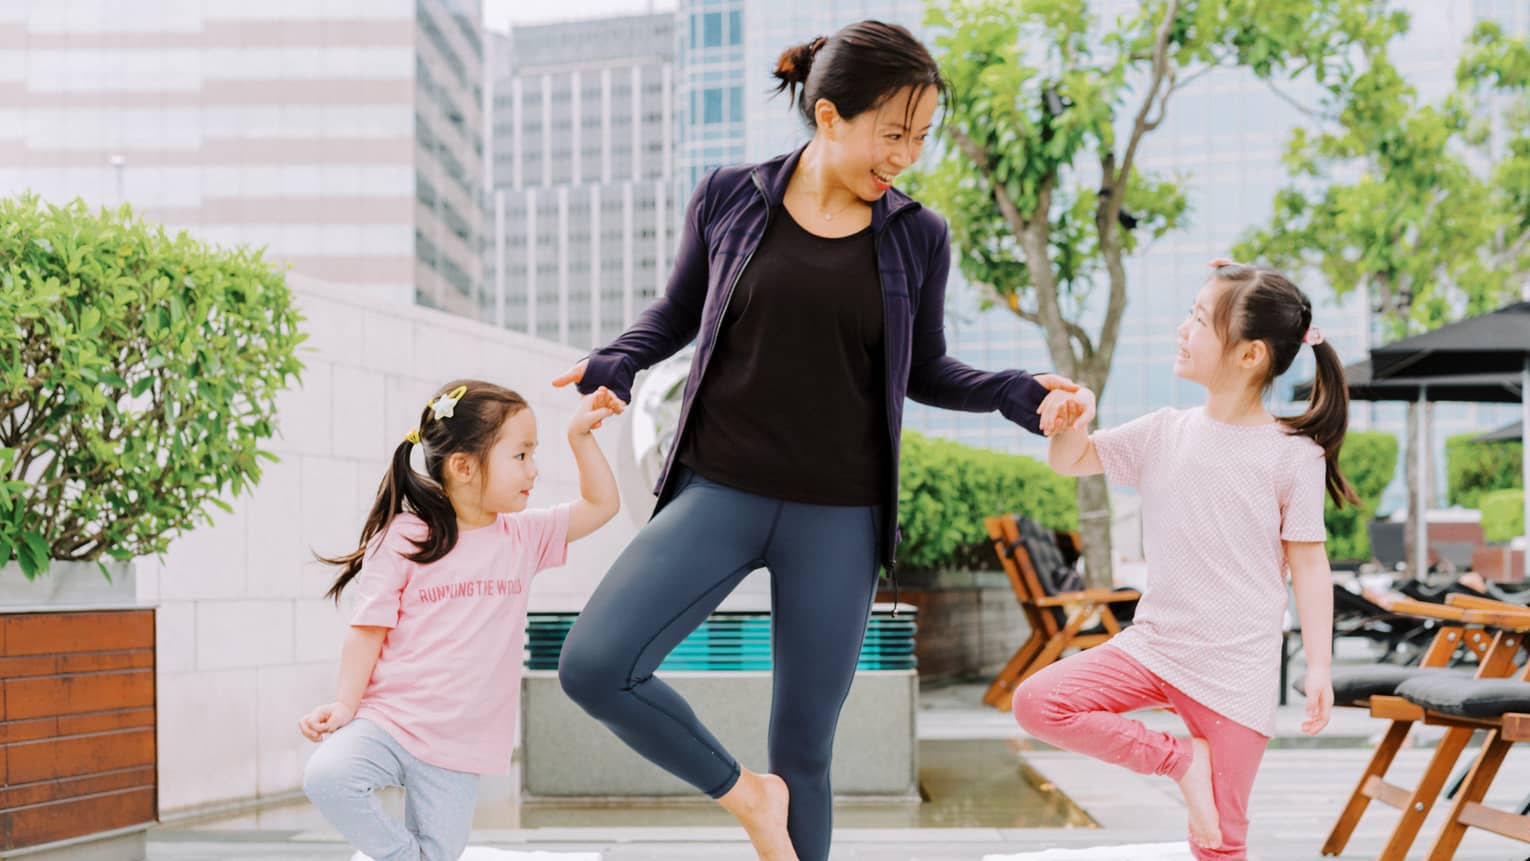 A mother and two young daughters laughing while doing yoga together.